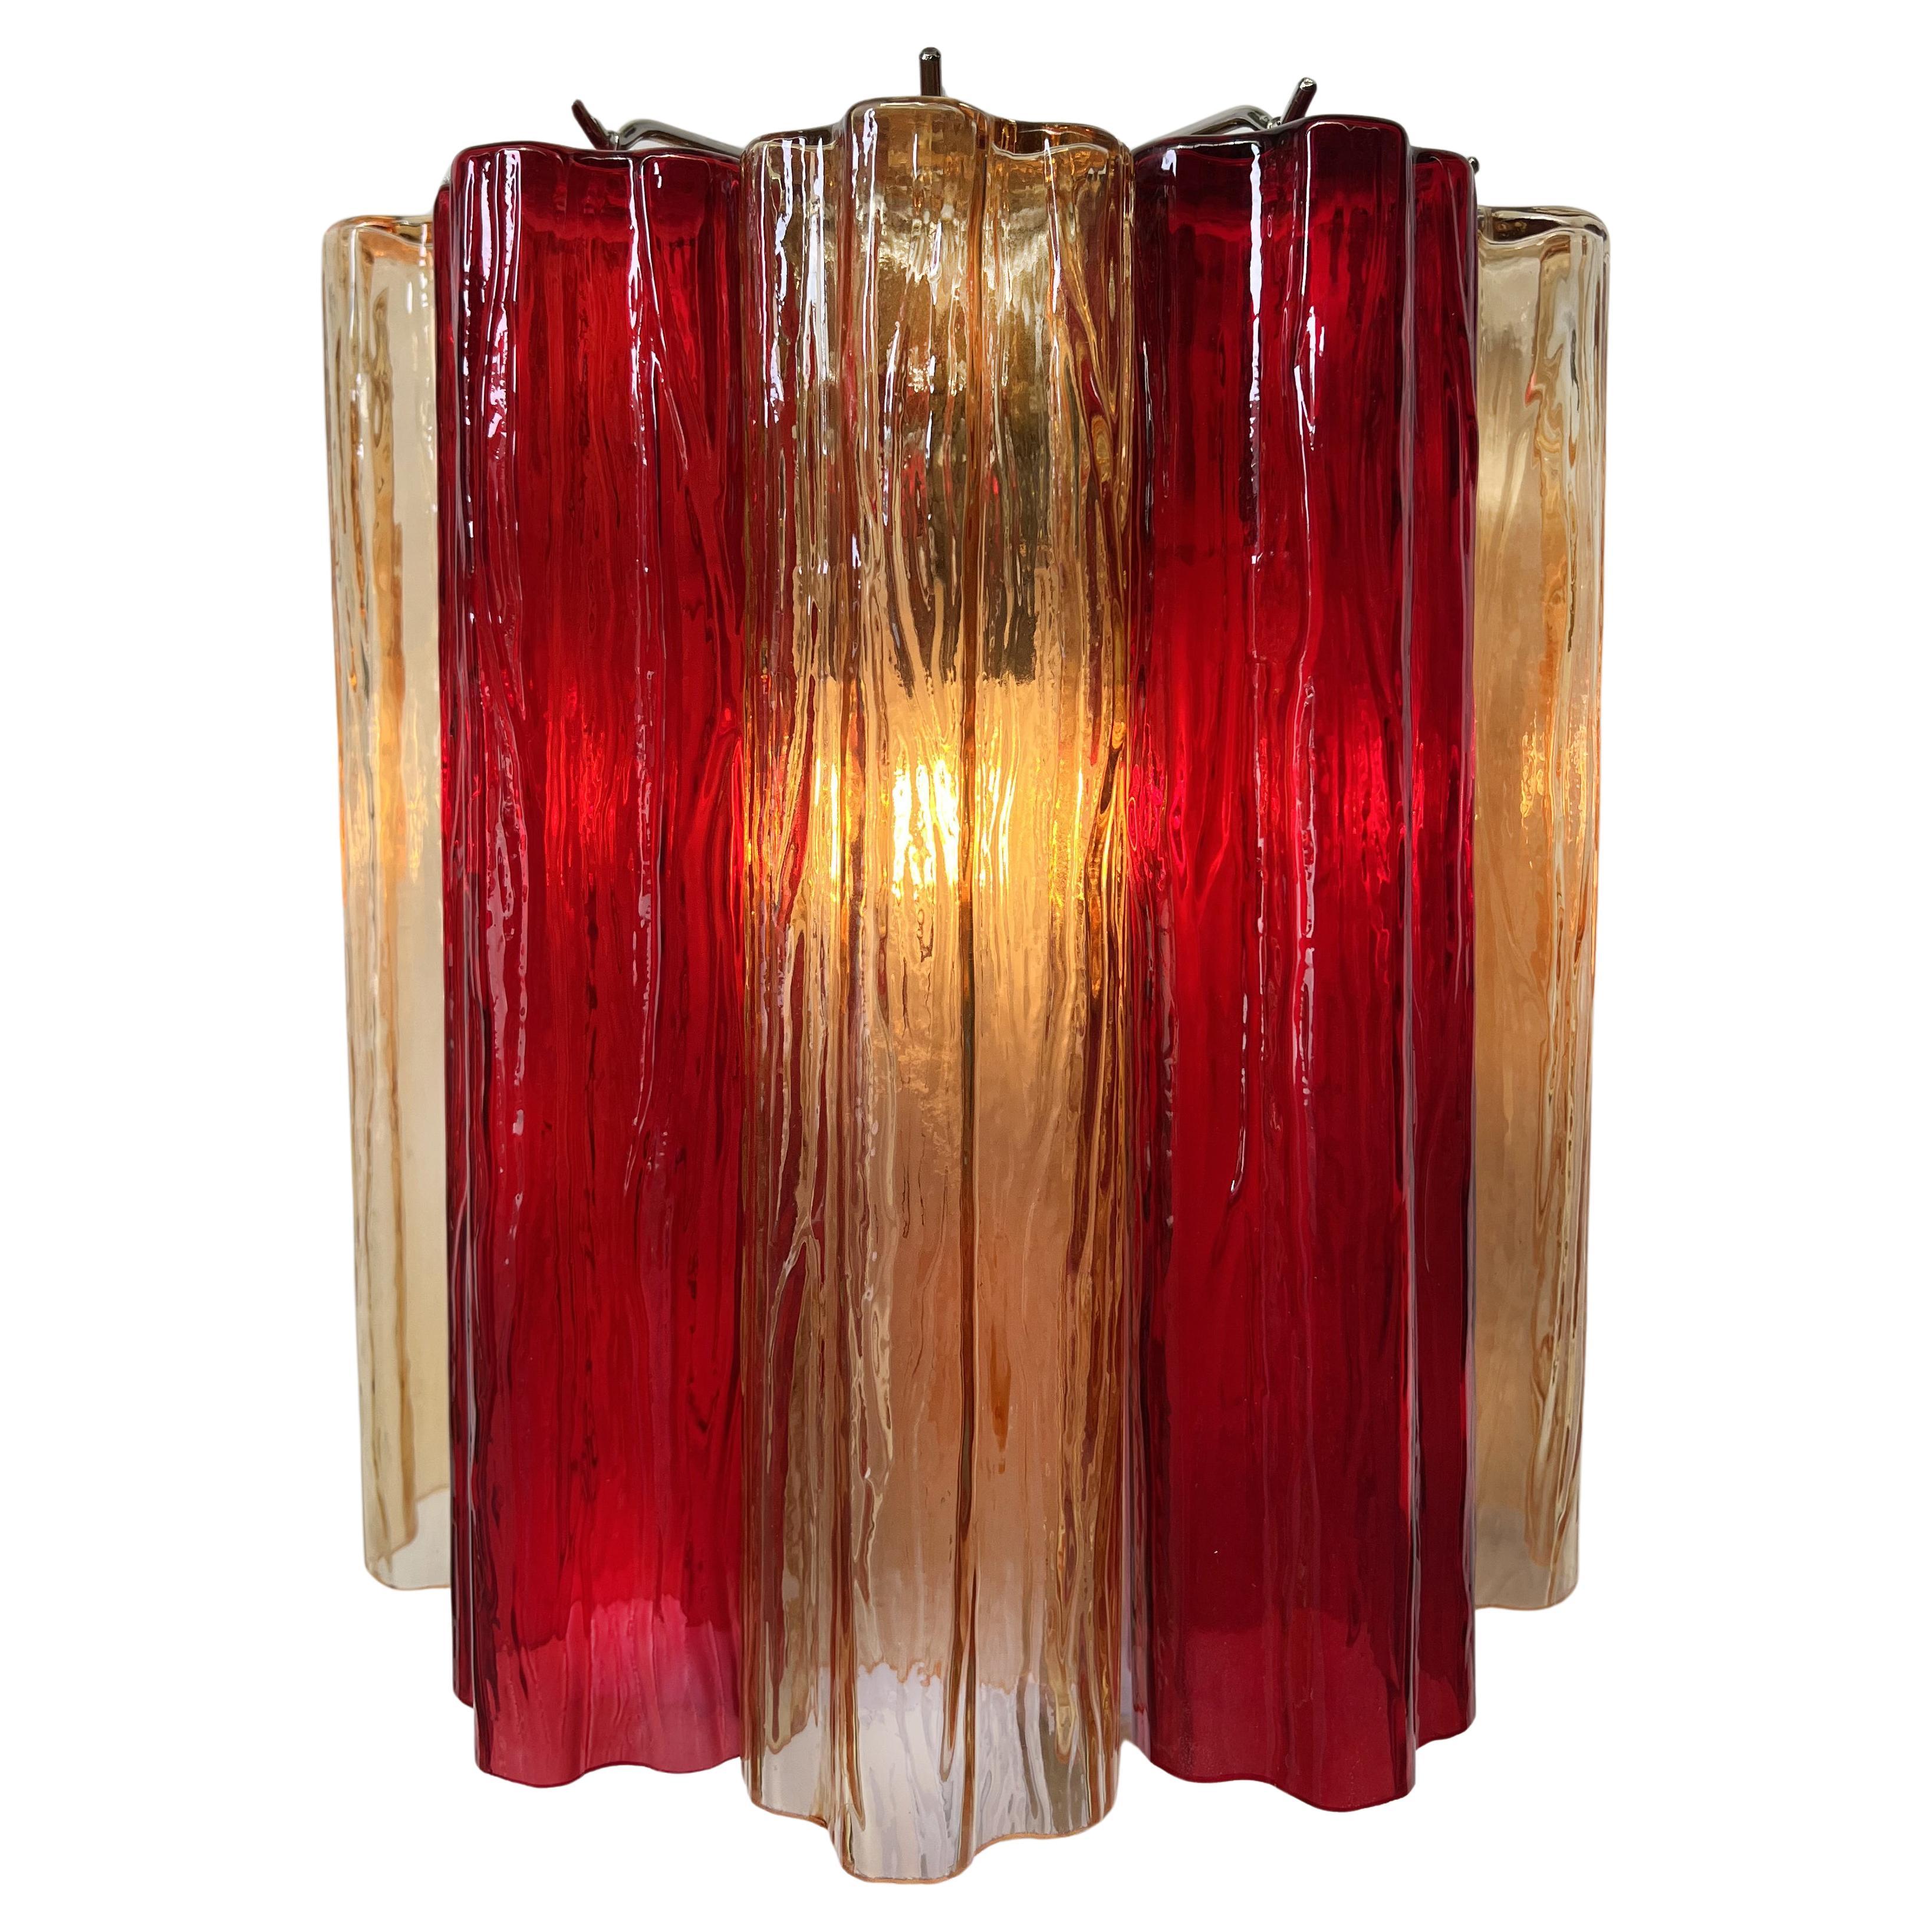 Italian Set of Four Ruby and Amber Color Tronchi Sconces Murano